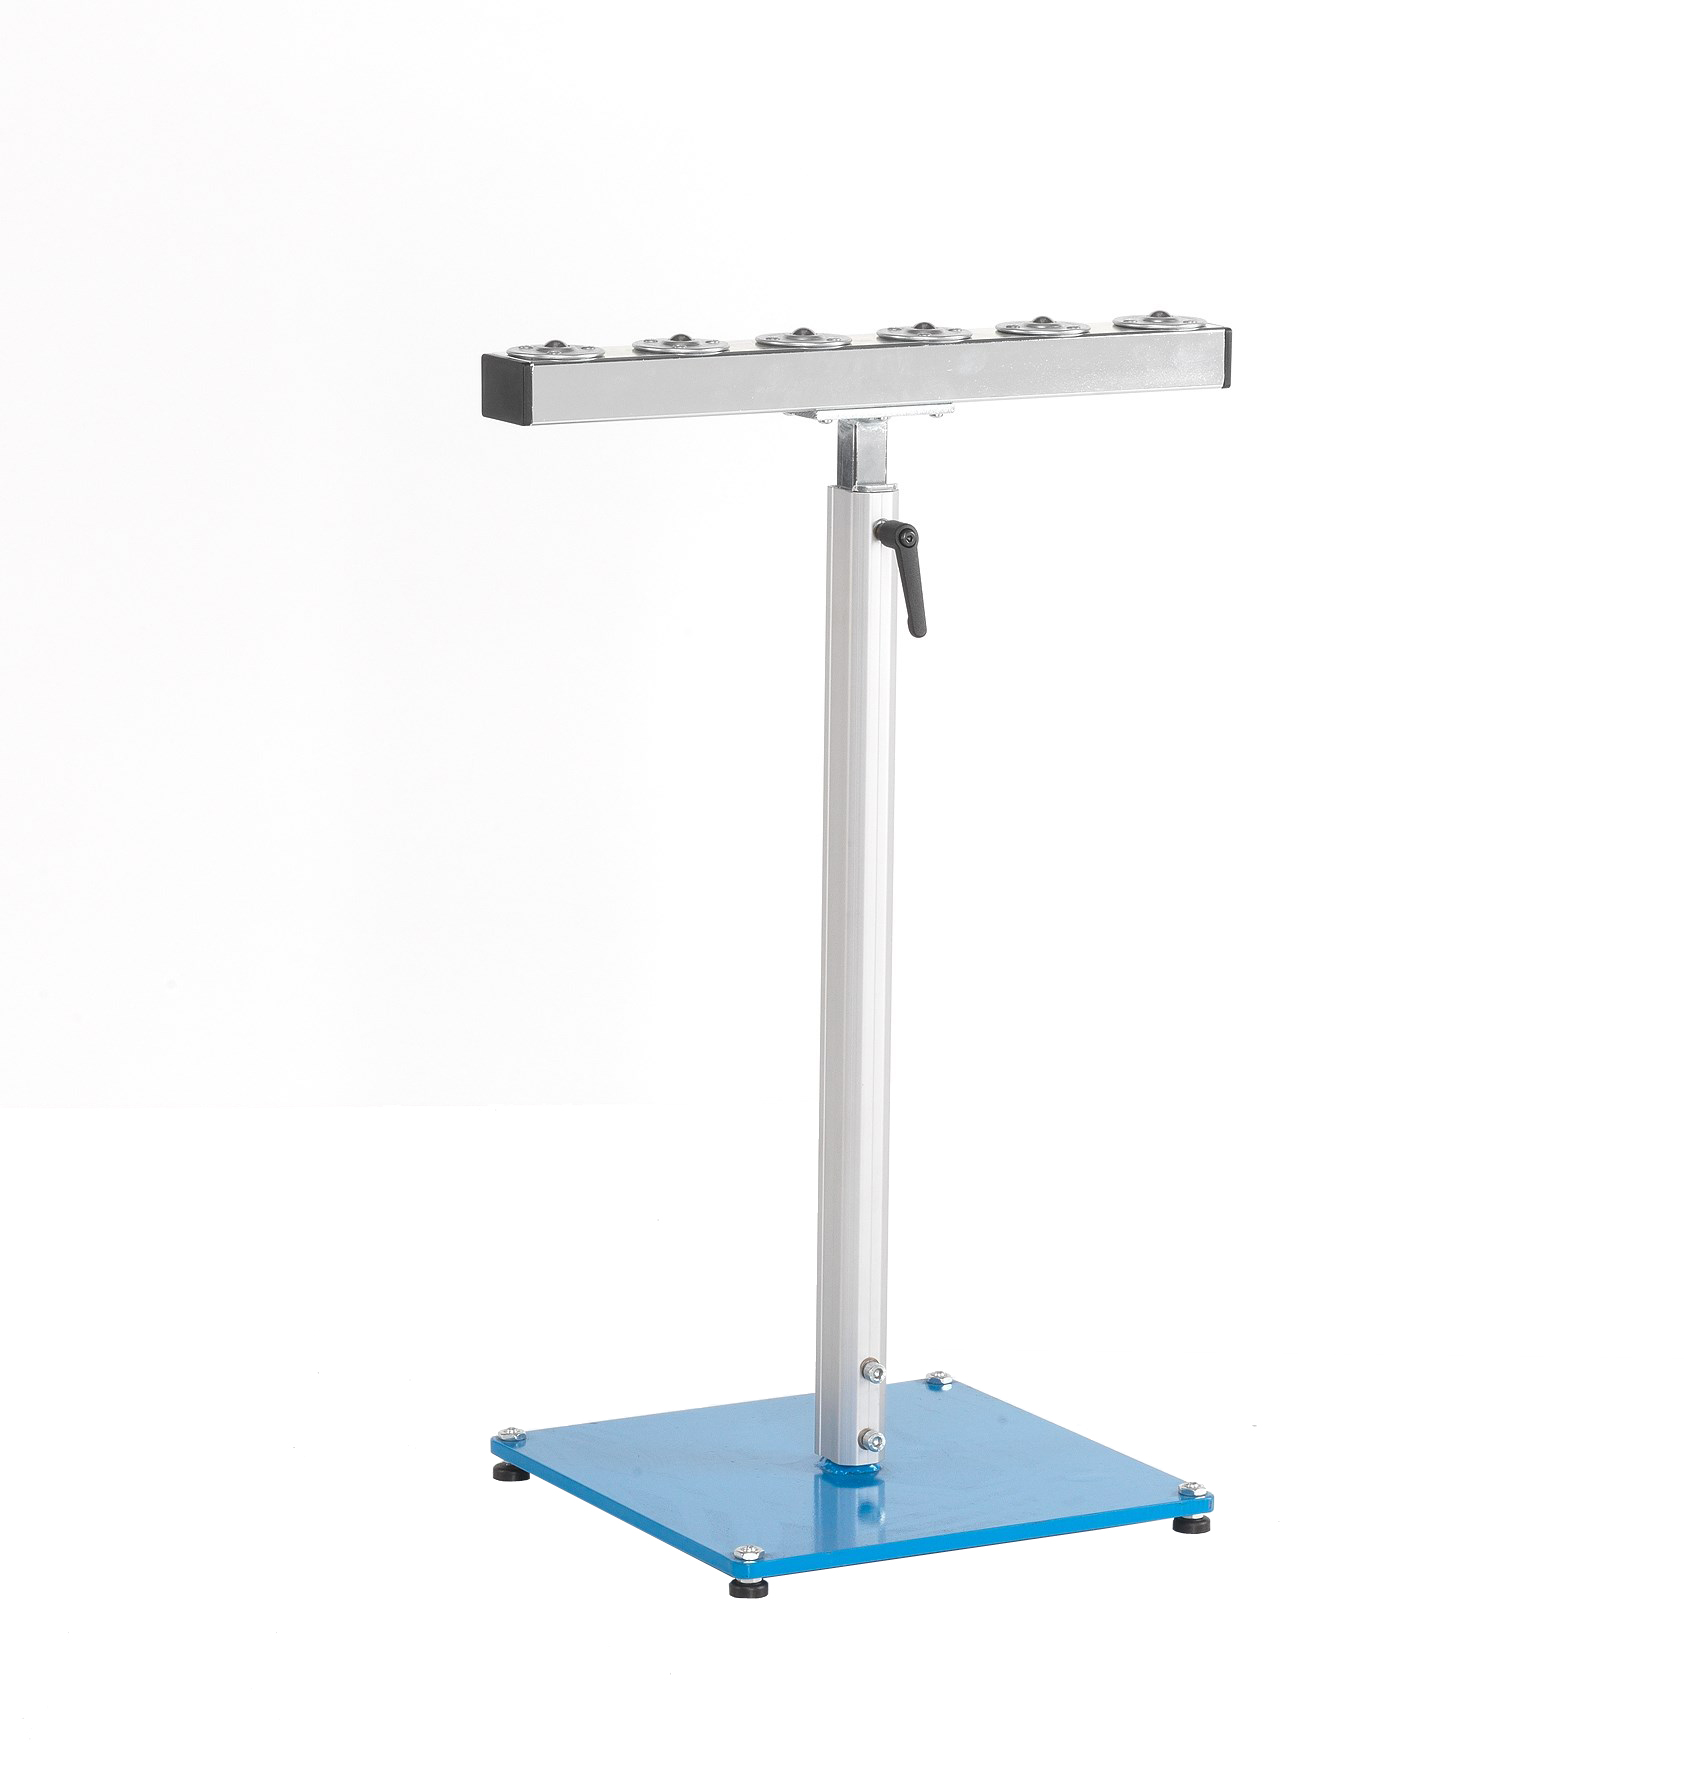 Material support stand with ball roller rail with 6 ball rollers